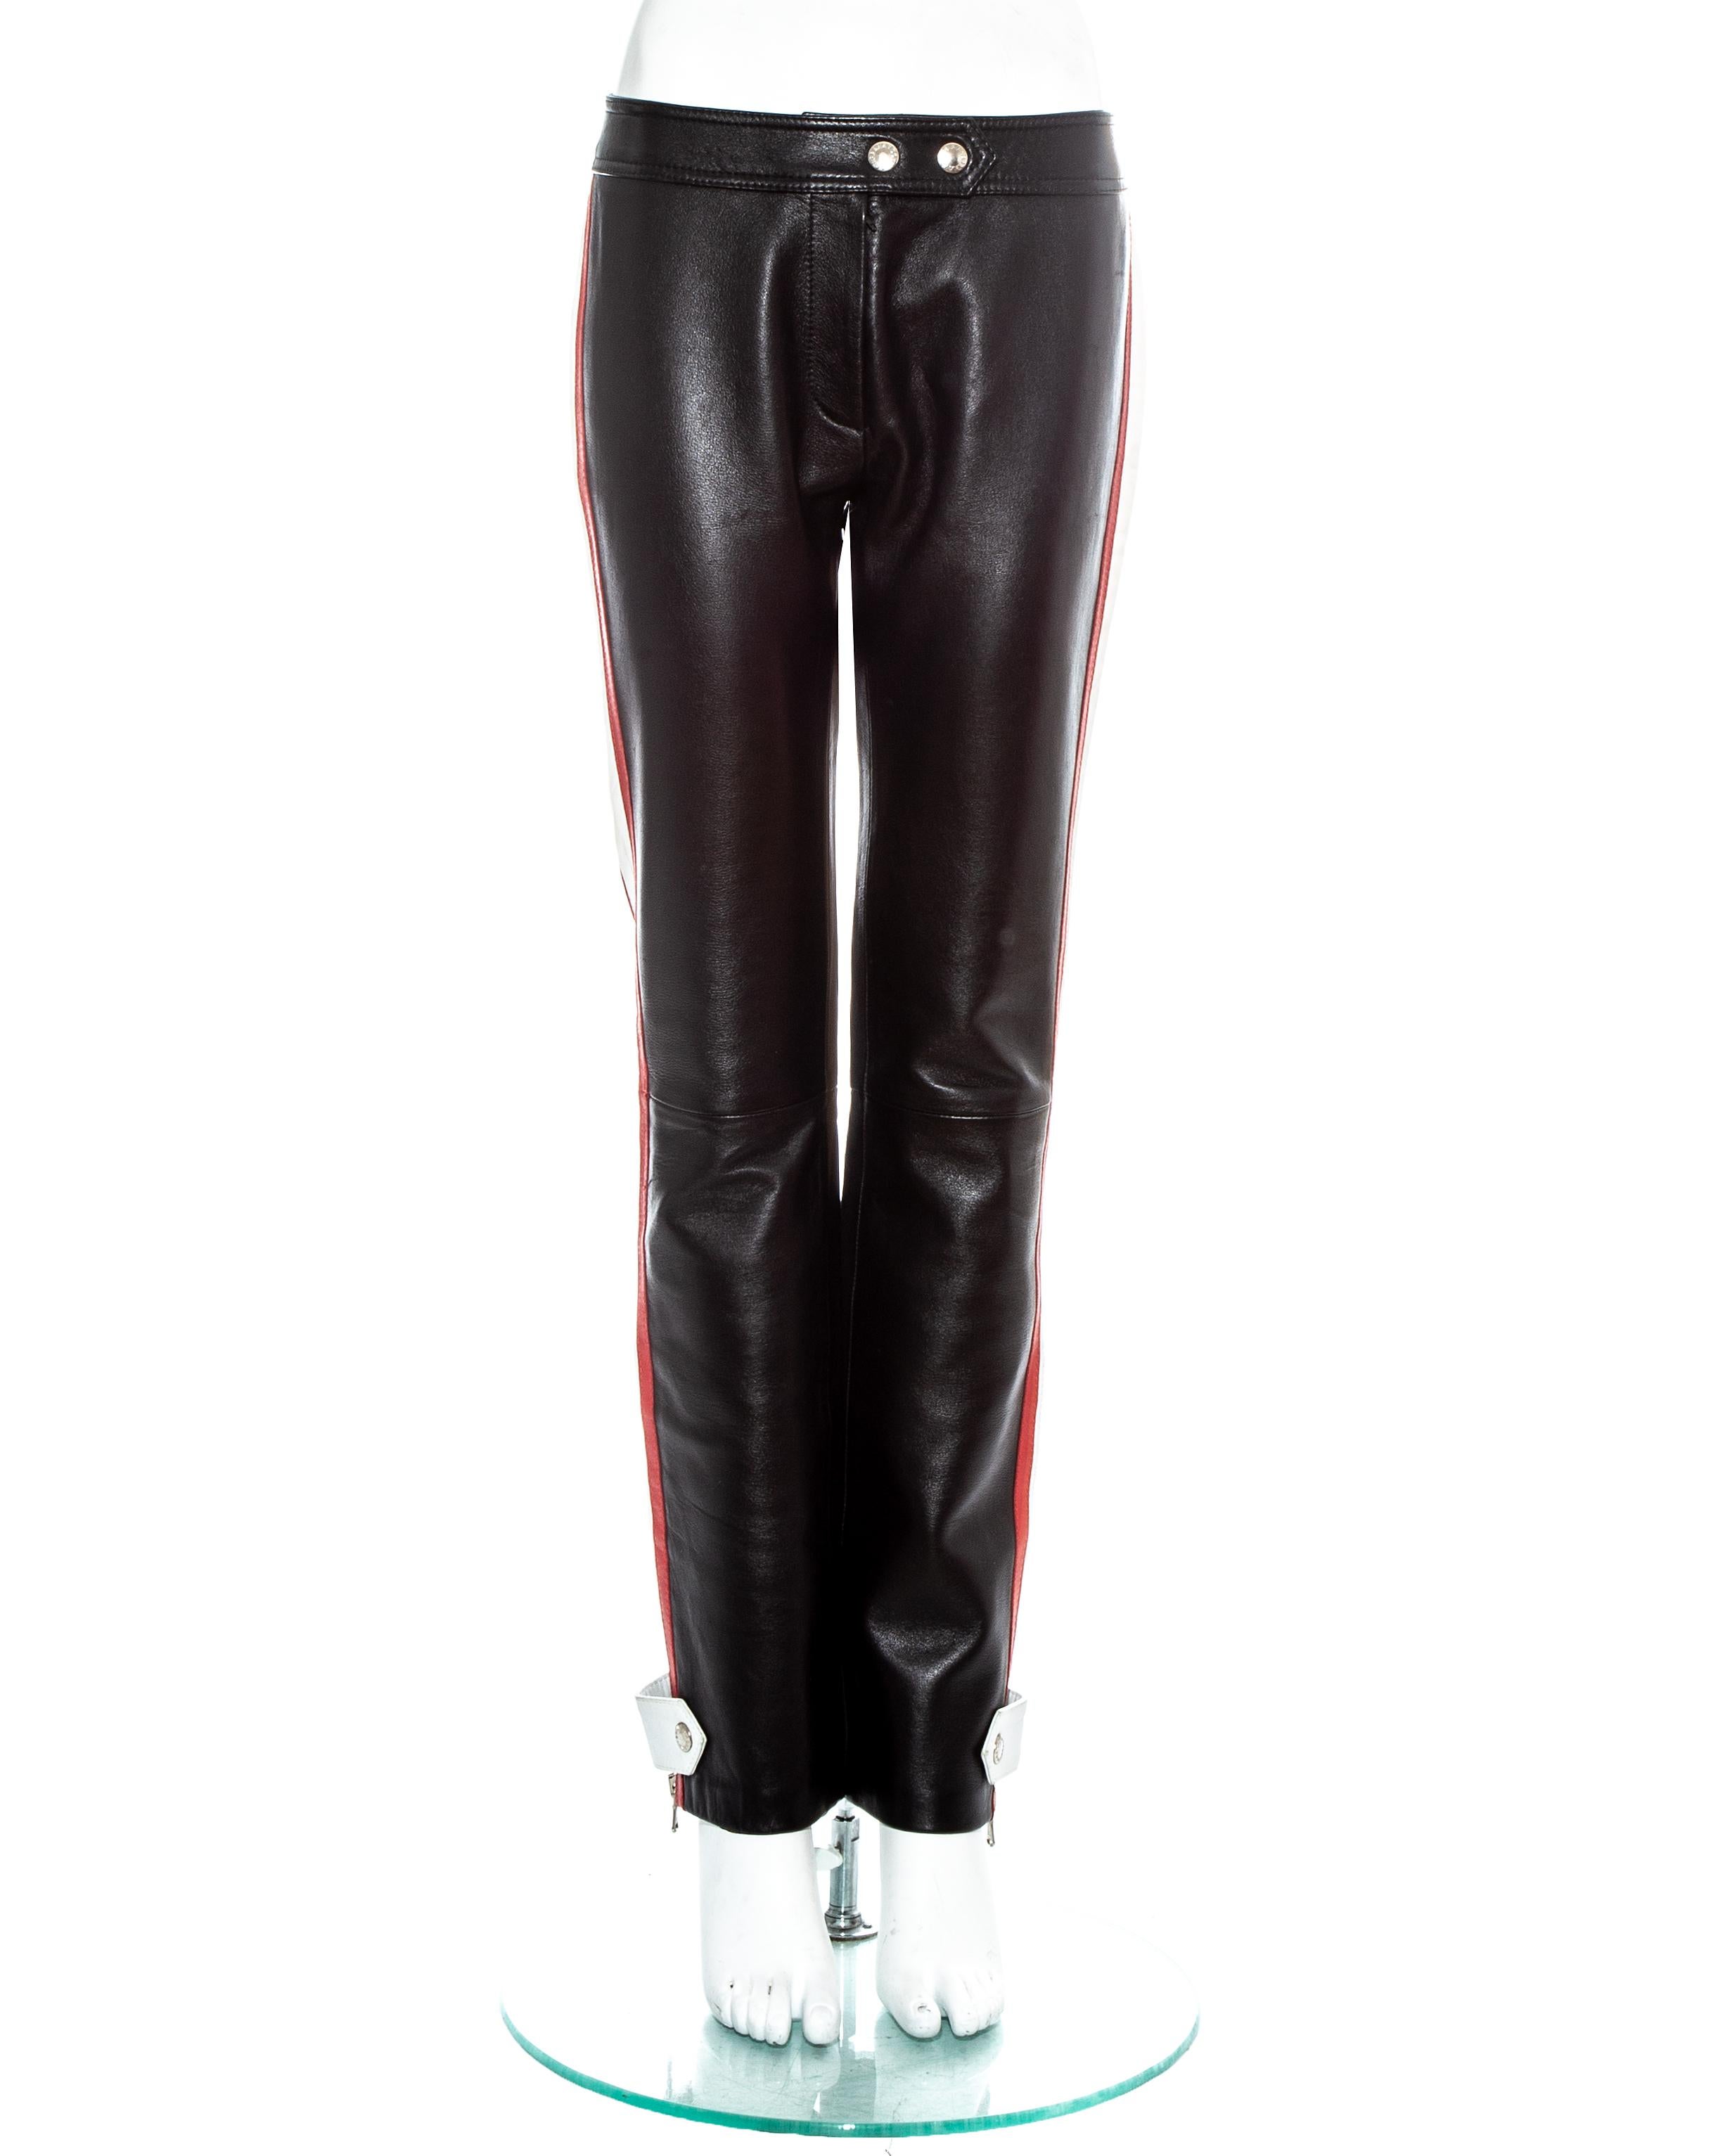 Dolce & Gabbana black leather biker pants with red and white striped panels on side and zip fastenings on ankles.

Spring-Summer 2001